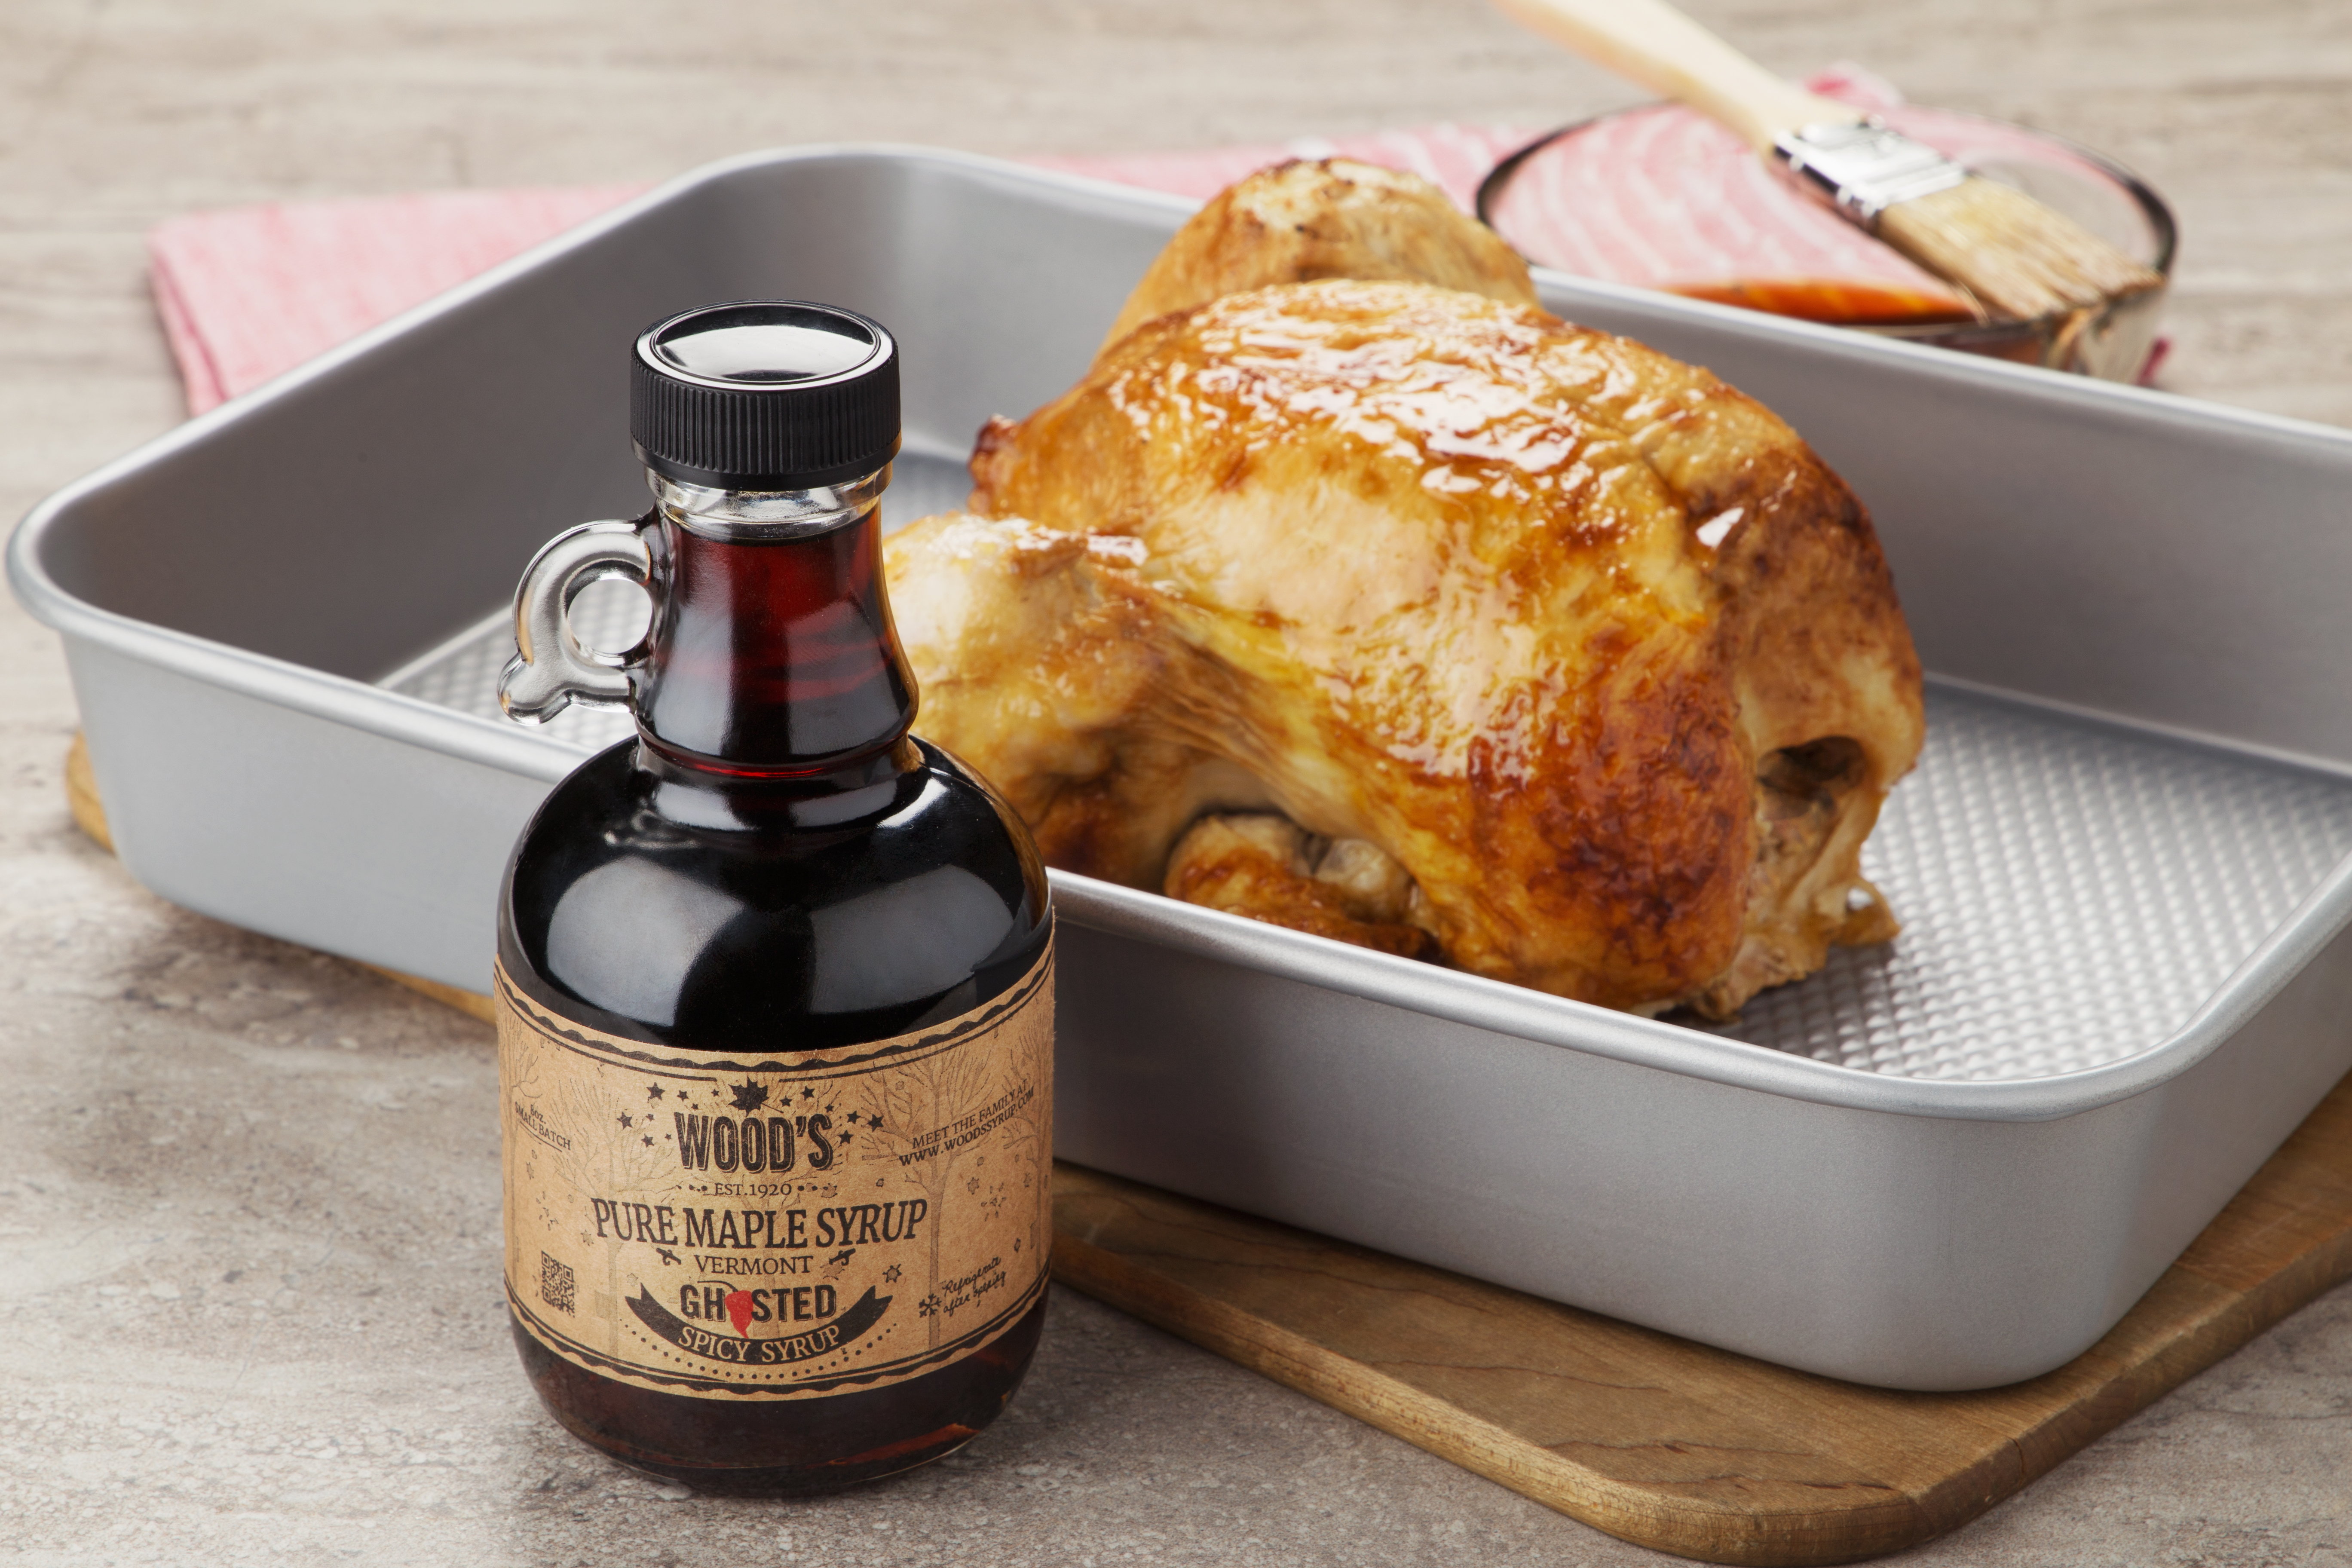 A bottle of ghost pepper infused maple syrup from Wood's Maple syrup sits next to a roasted turkey